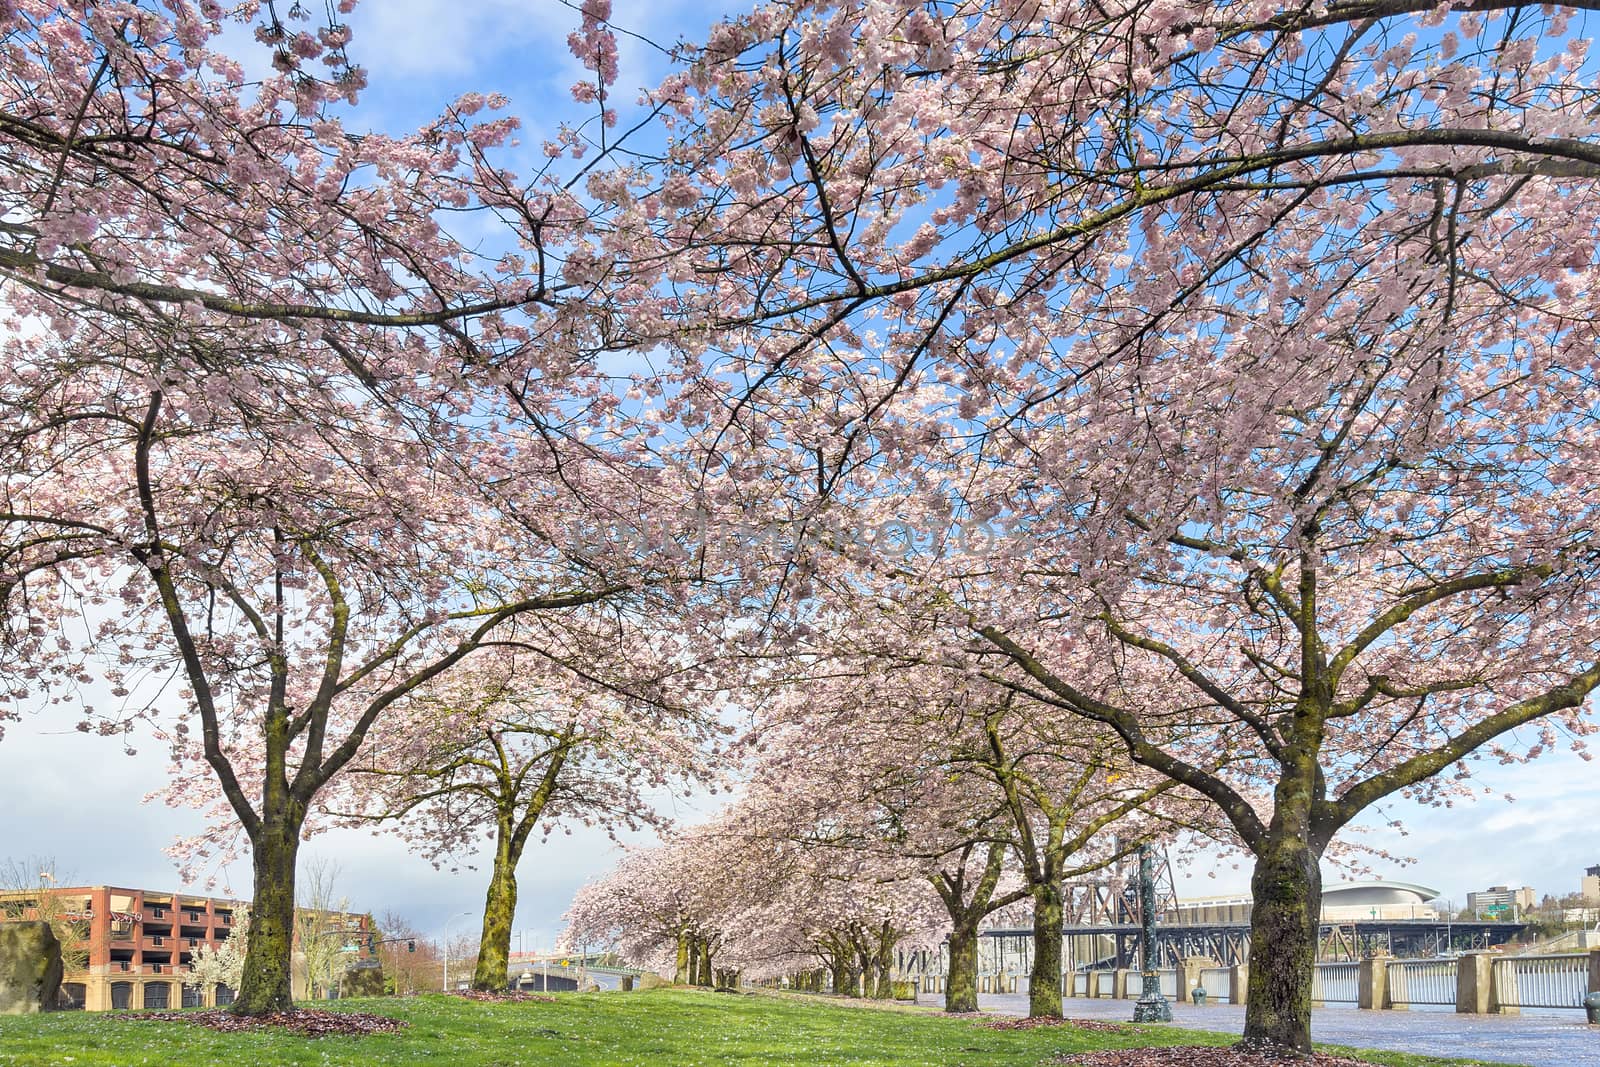 Rows of Cherry Blossom trees in bloom at Portland waterfront park in Spring Season